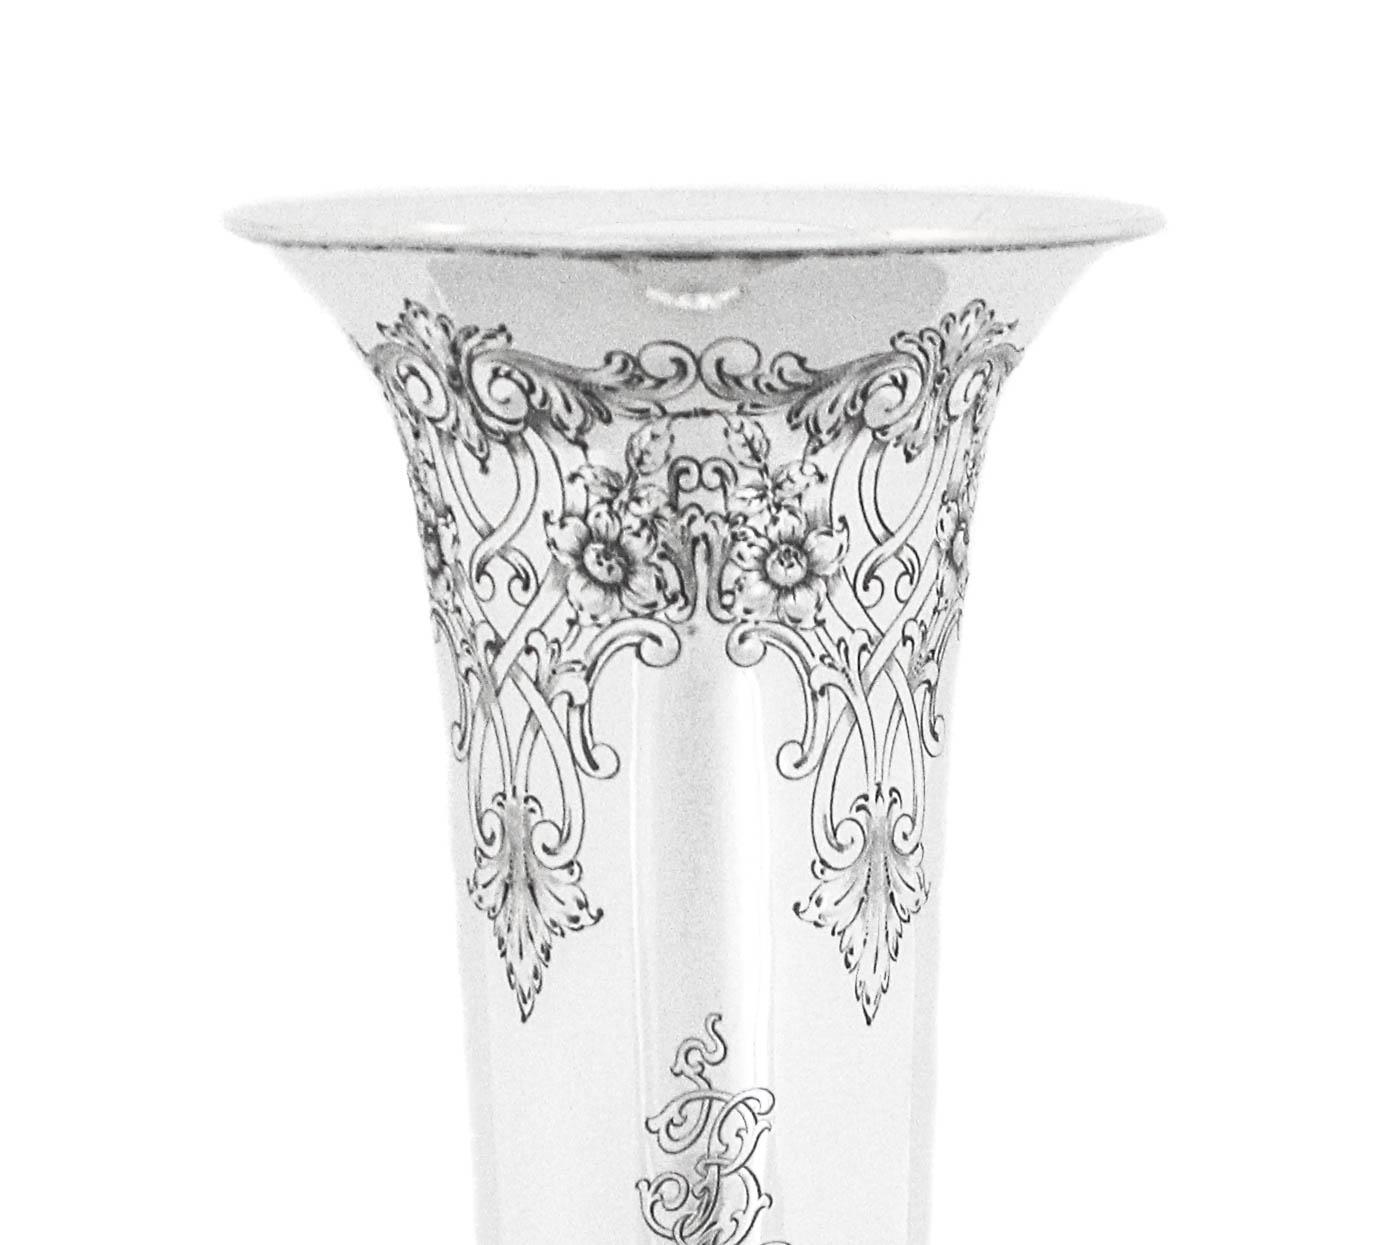 We are delighted to offer you this sterling silver trumpet vase manufactured by the Baltimore Silver Company.  It is lovely old-world chasing around both the base and top.  All the work is crisp and in mint condition, none has faded or been polished